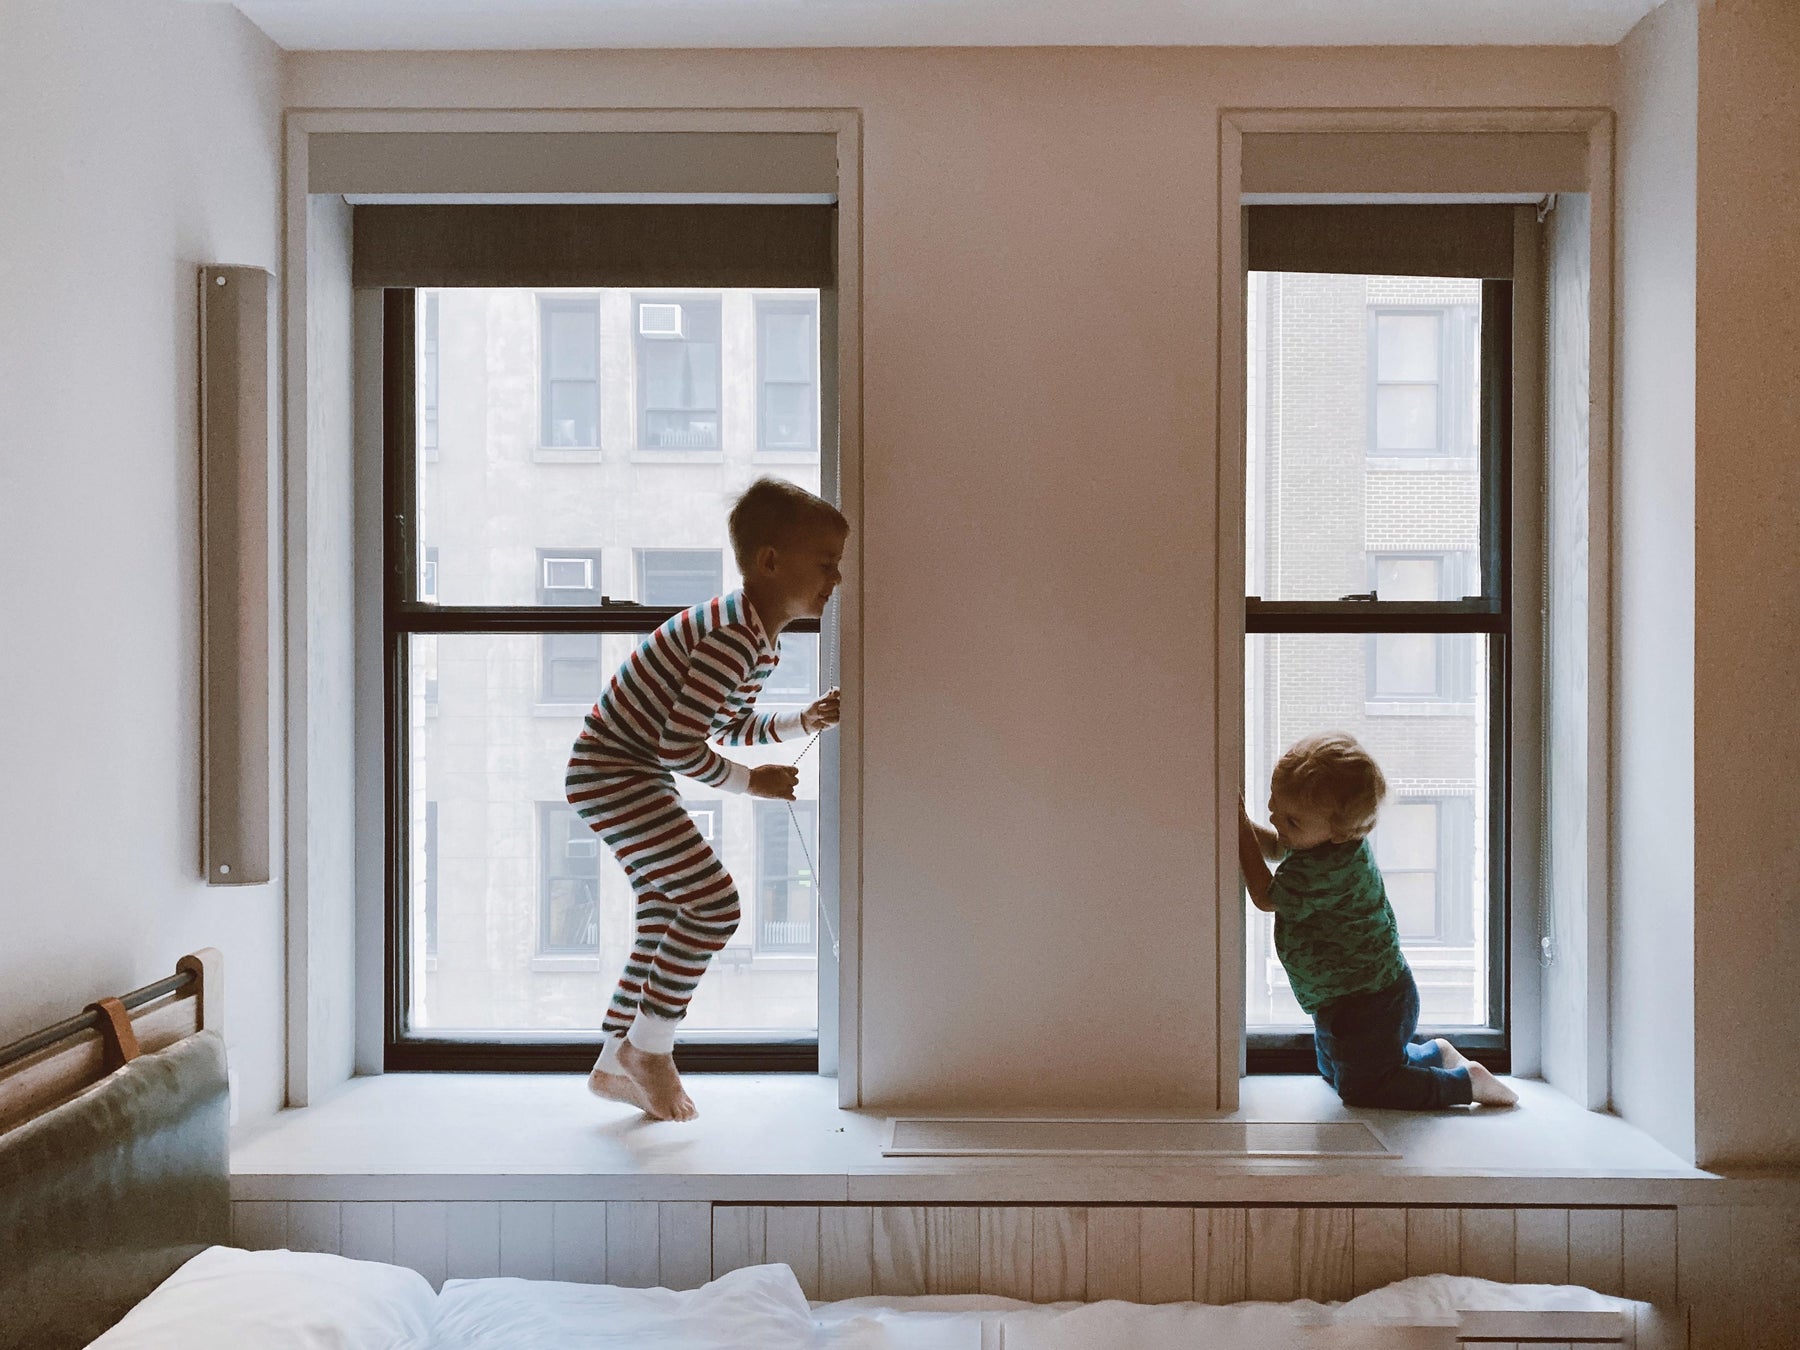 Top 5 Ways To Promoting Safety at Home for Kids - XFasten